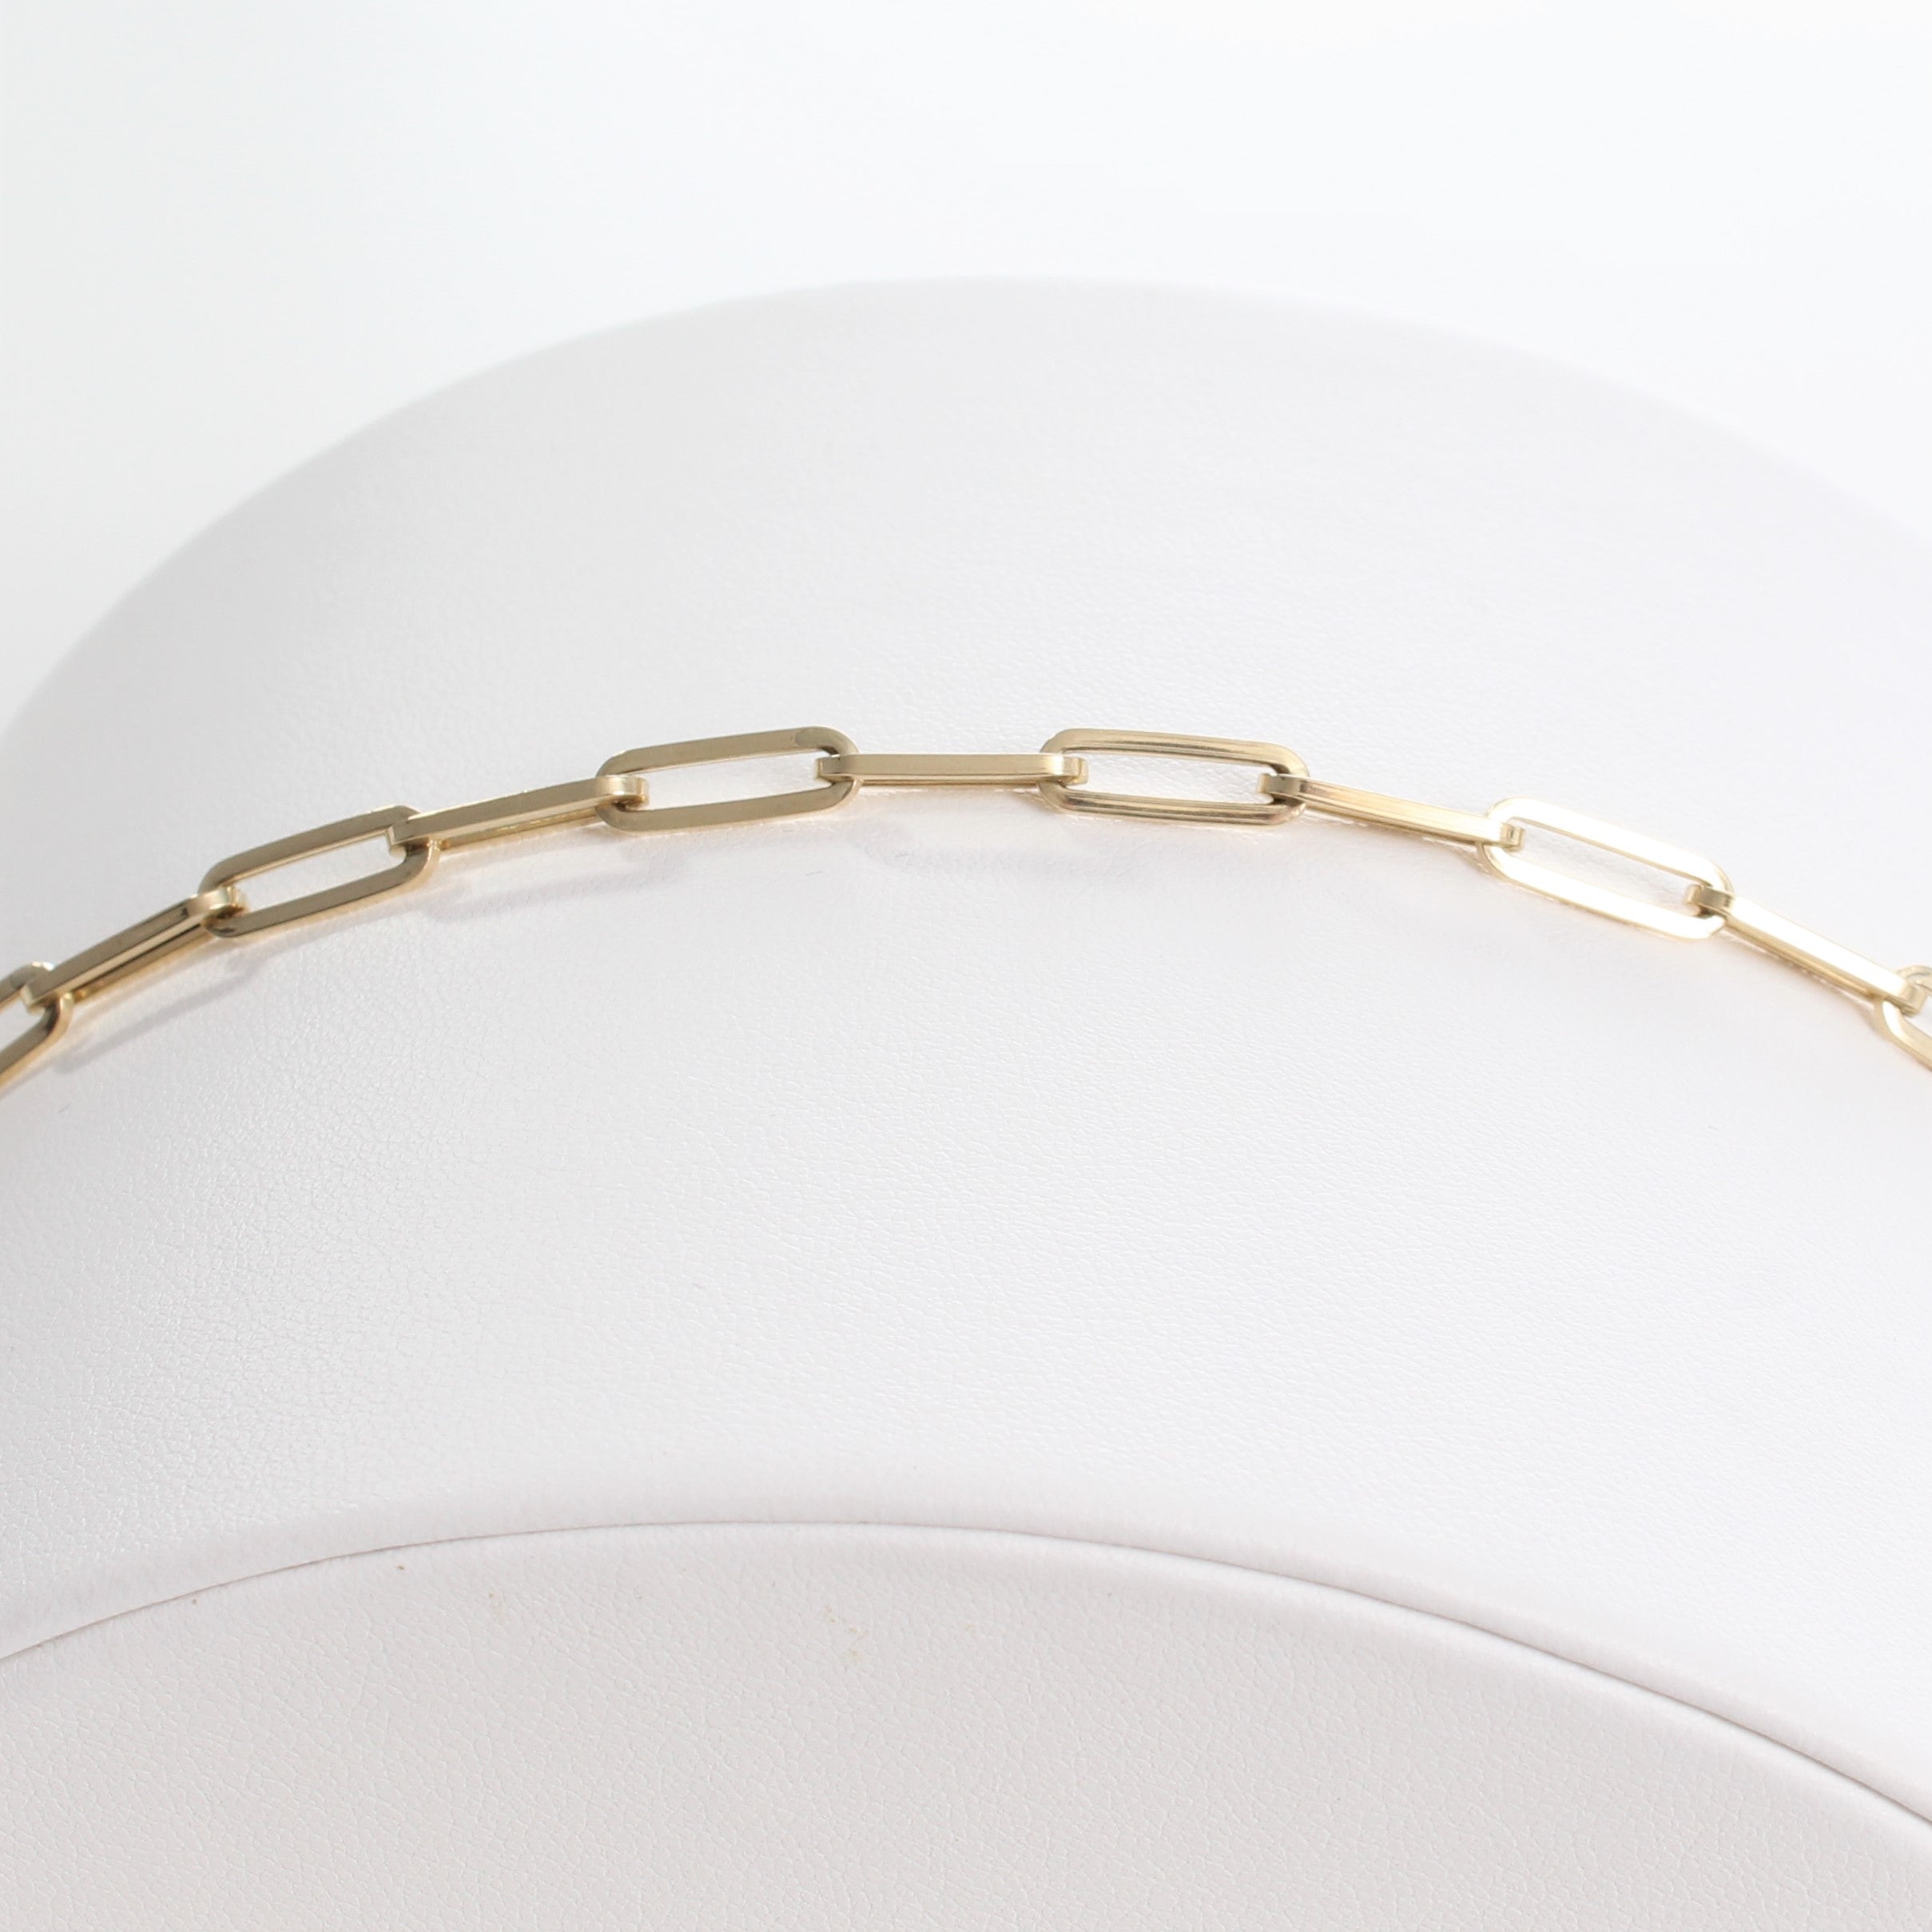 14k Yellow Gold Retro Elongated Link Paperclip Medium Link Bracelet. close-up view of unclasped bracelet laid out on a white jewelry display.